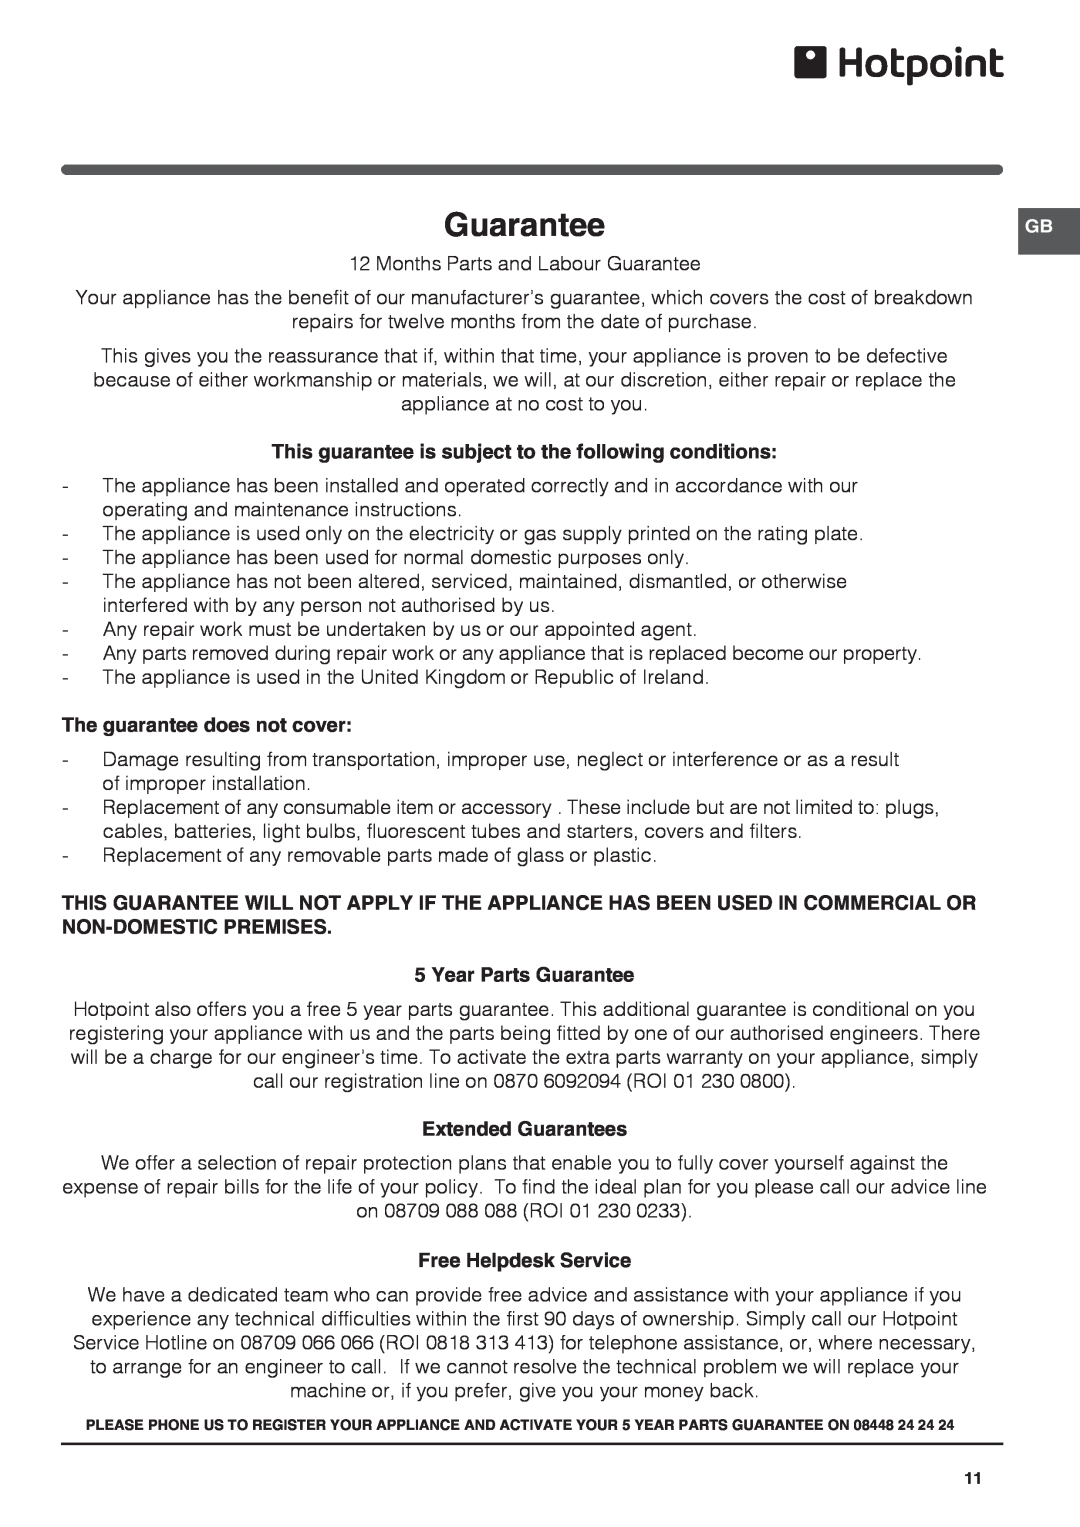 Hotpoint ffaa52k-1 manual Guarantee, This guarantee is subject to the following conditions, The guarantee does not cover 